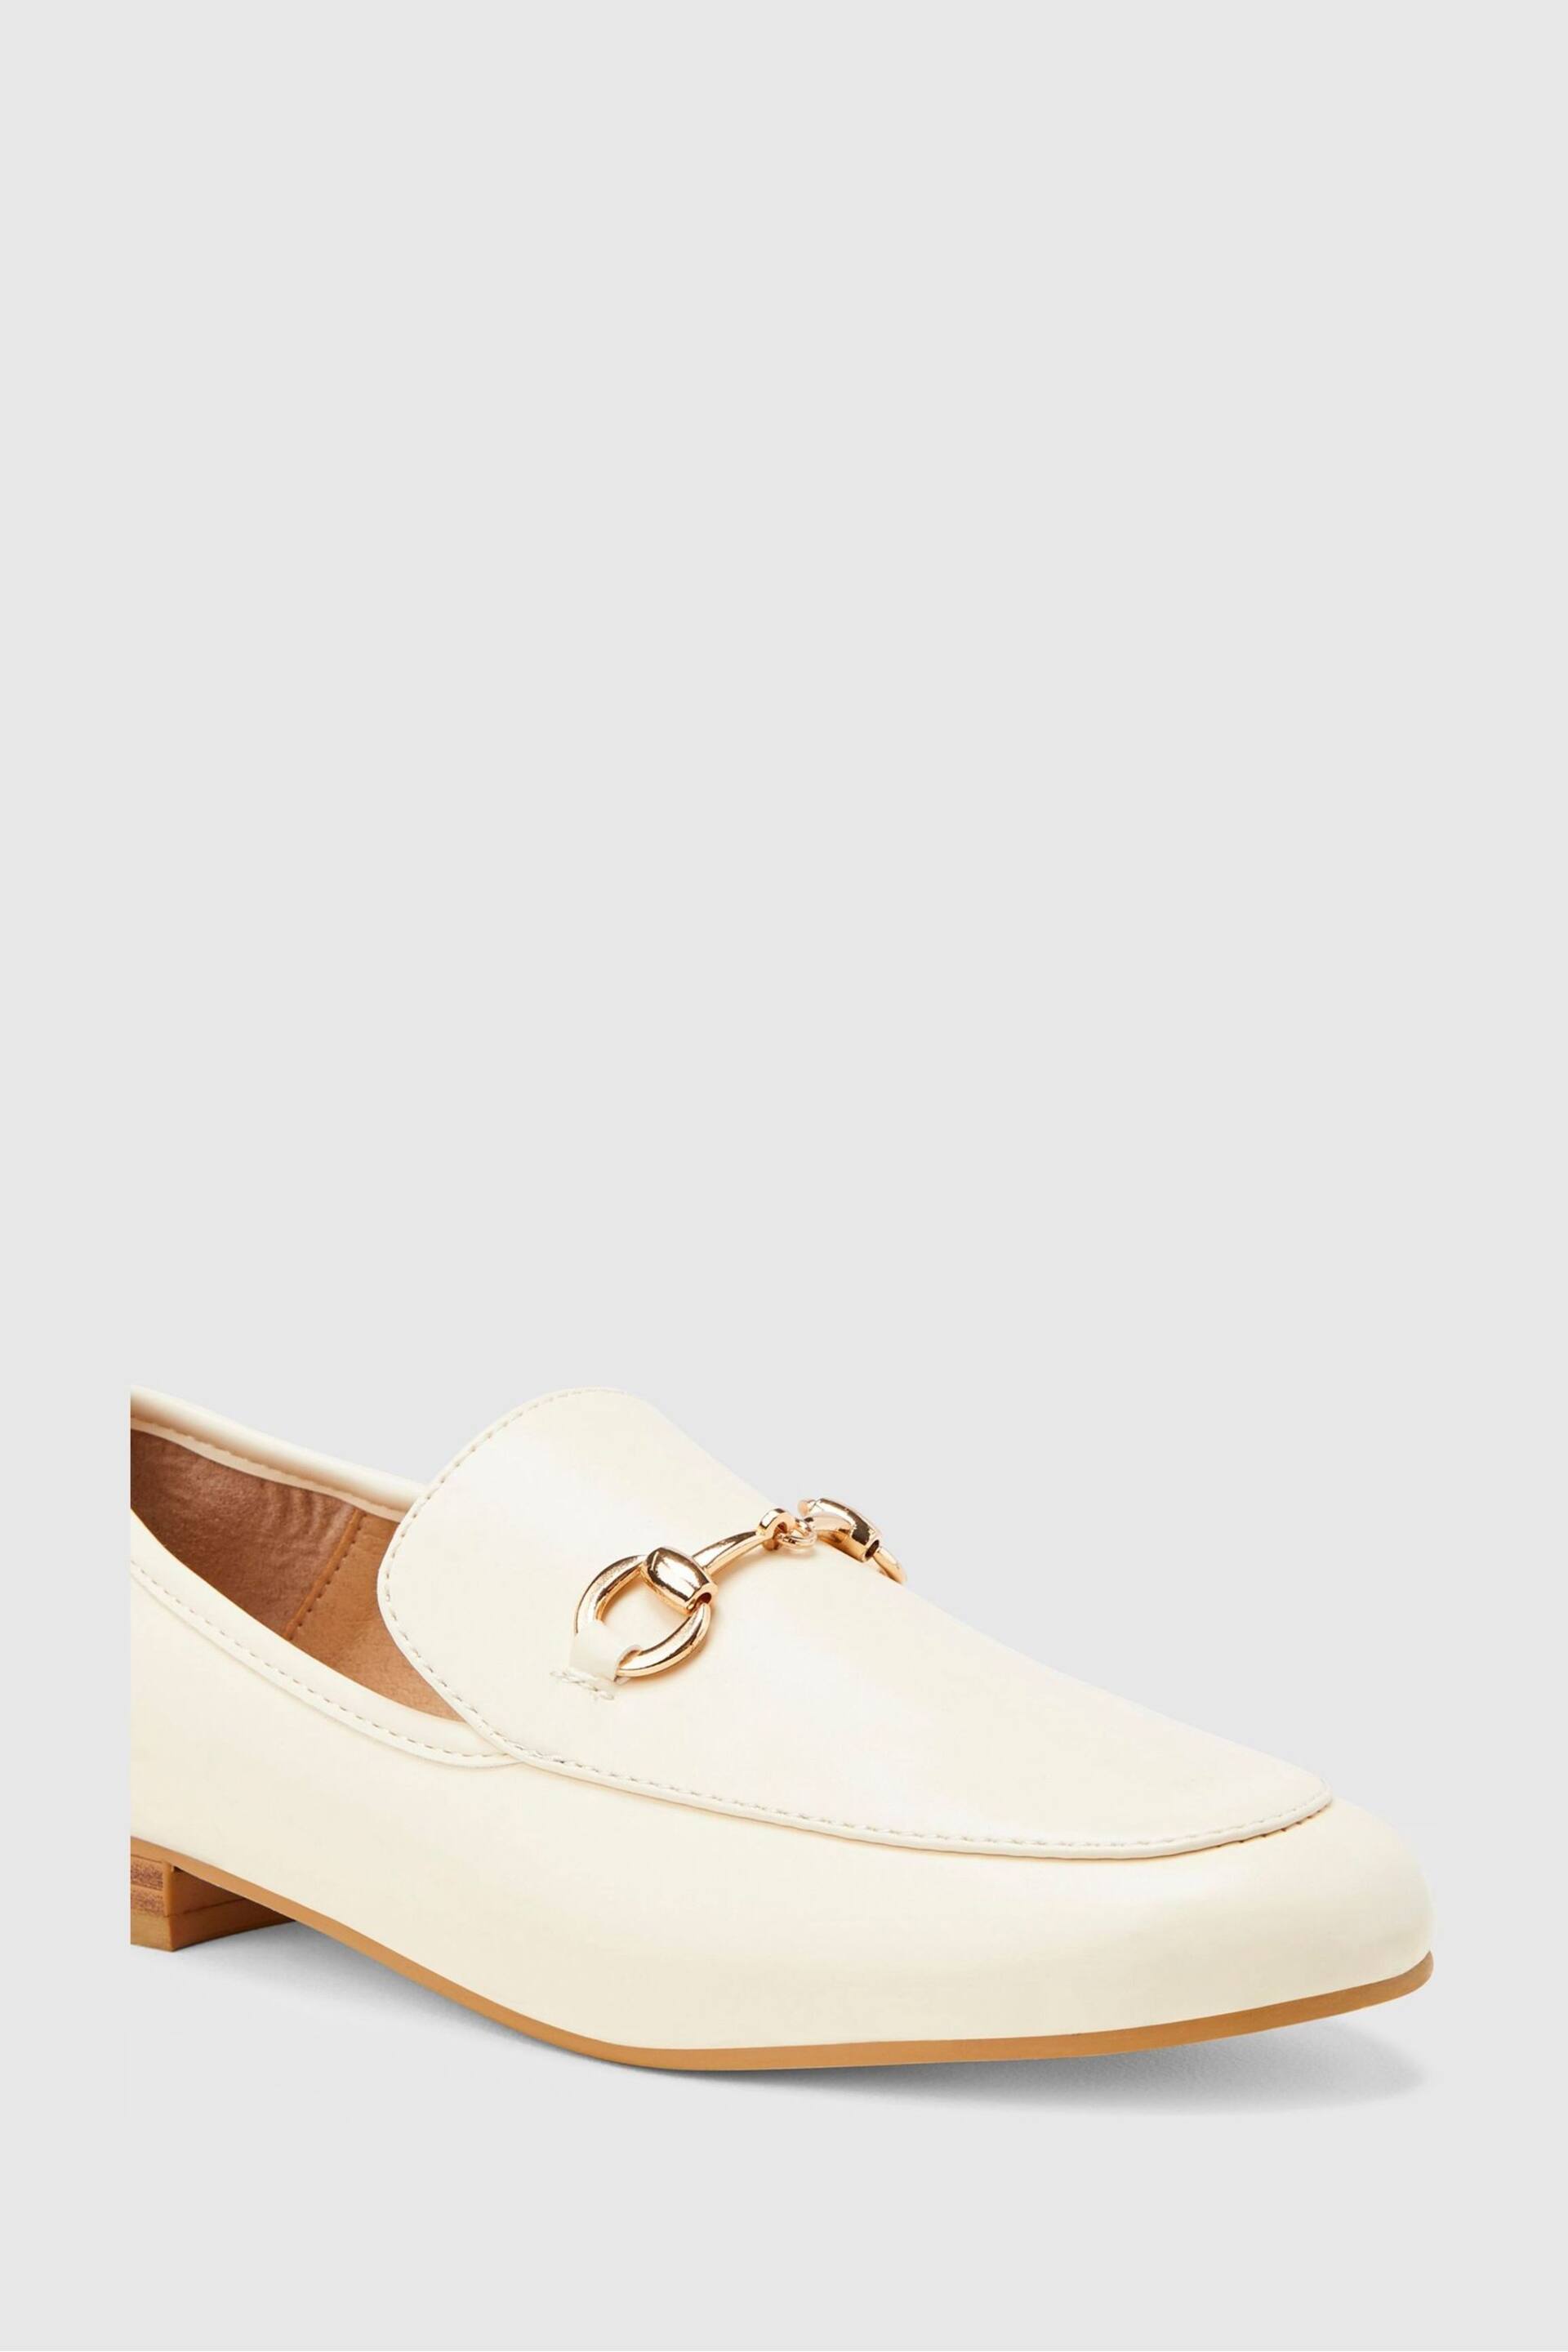 Novo Cream Early Flat Loafers - Image 2 of 3